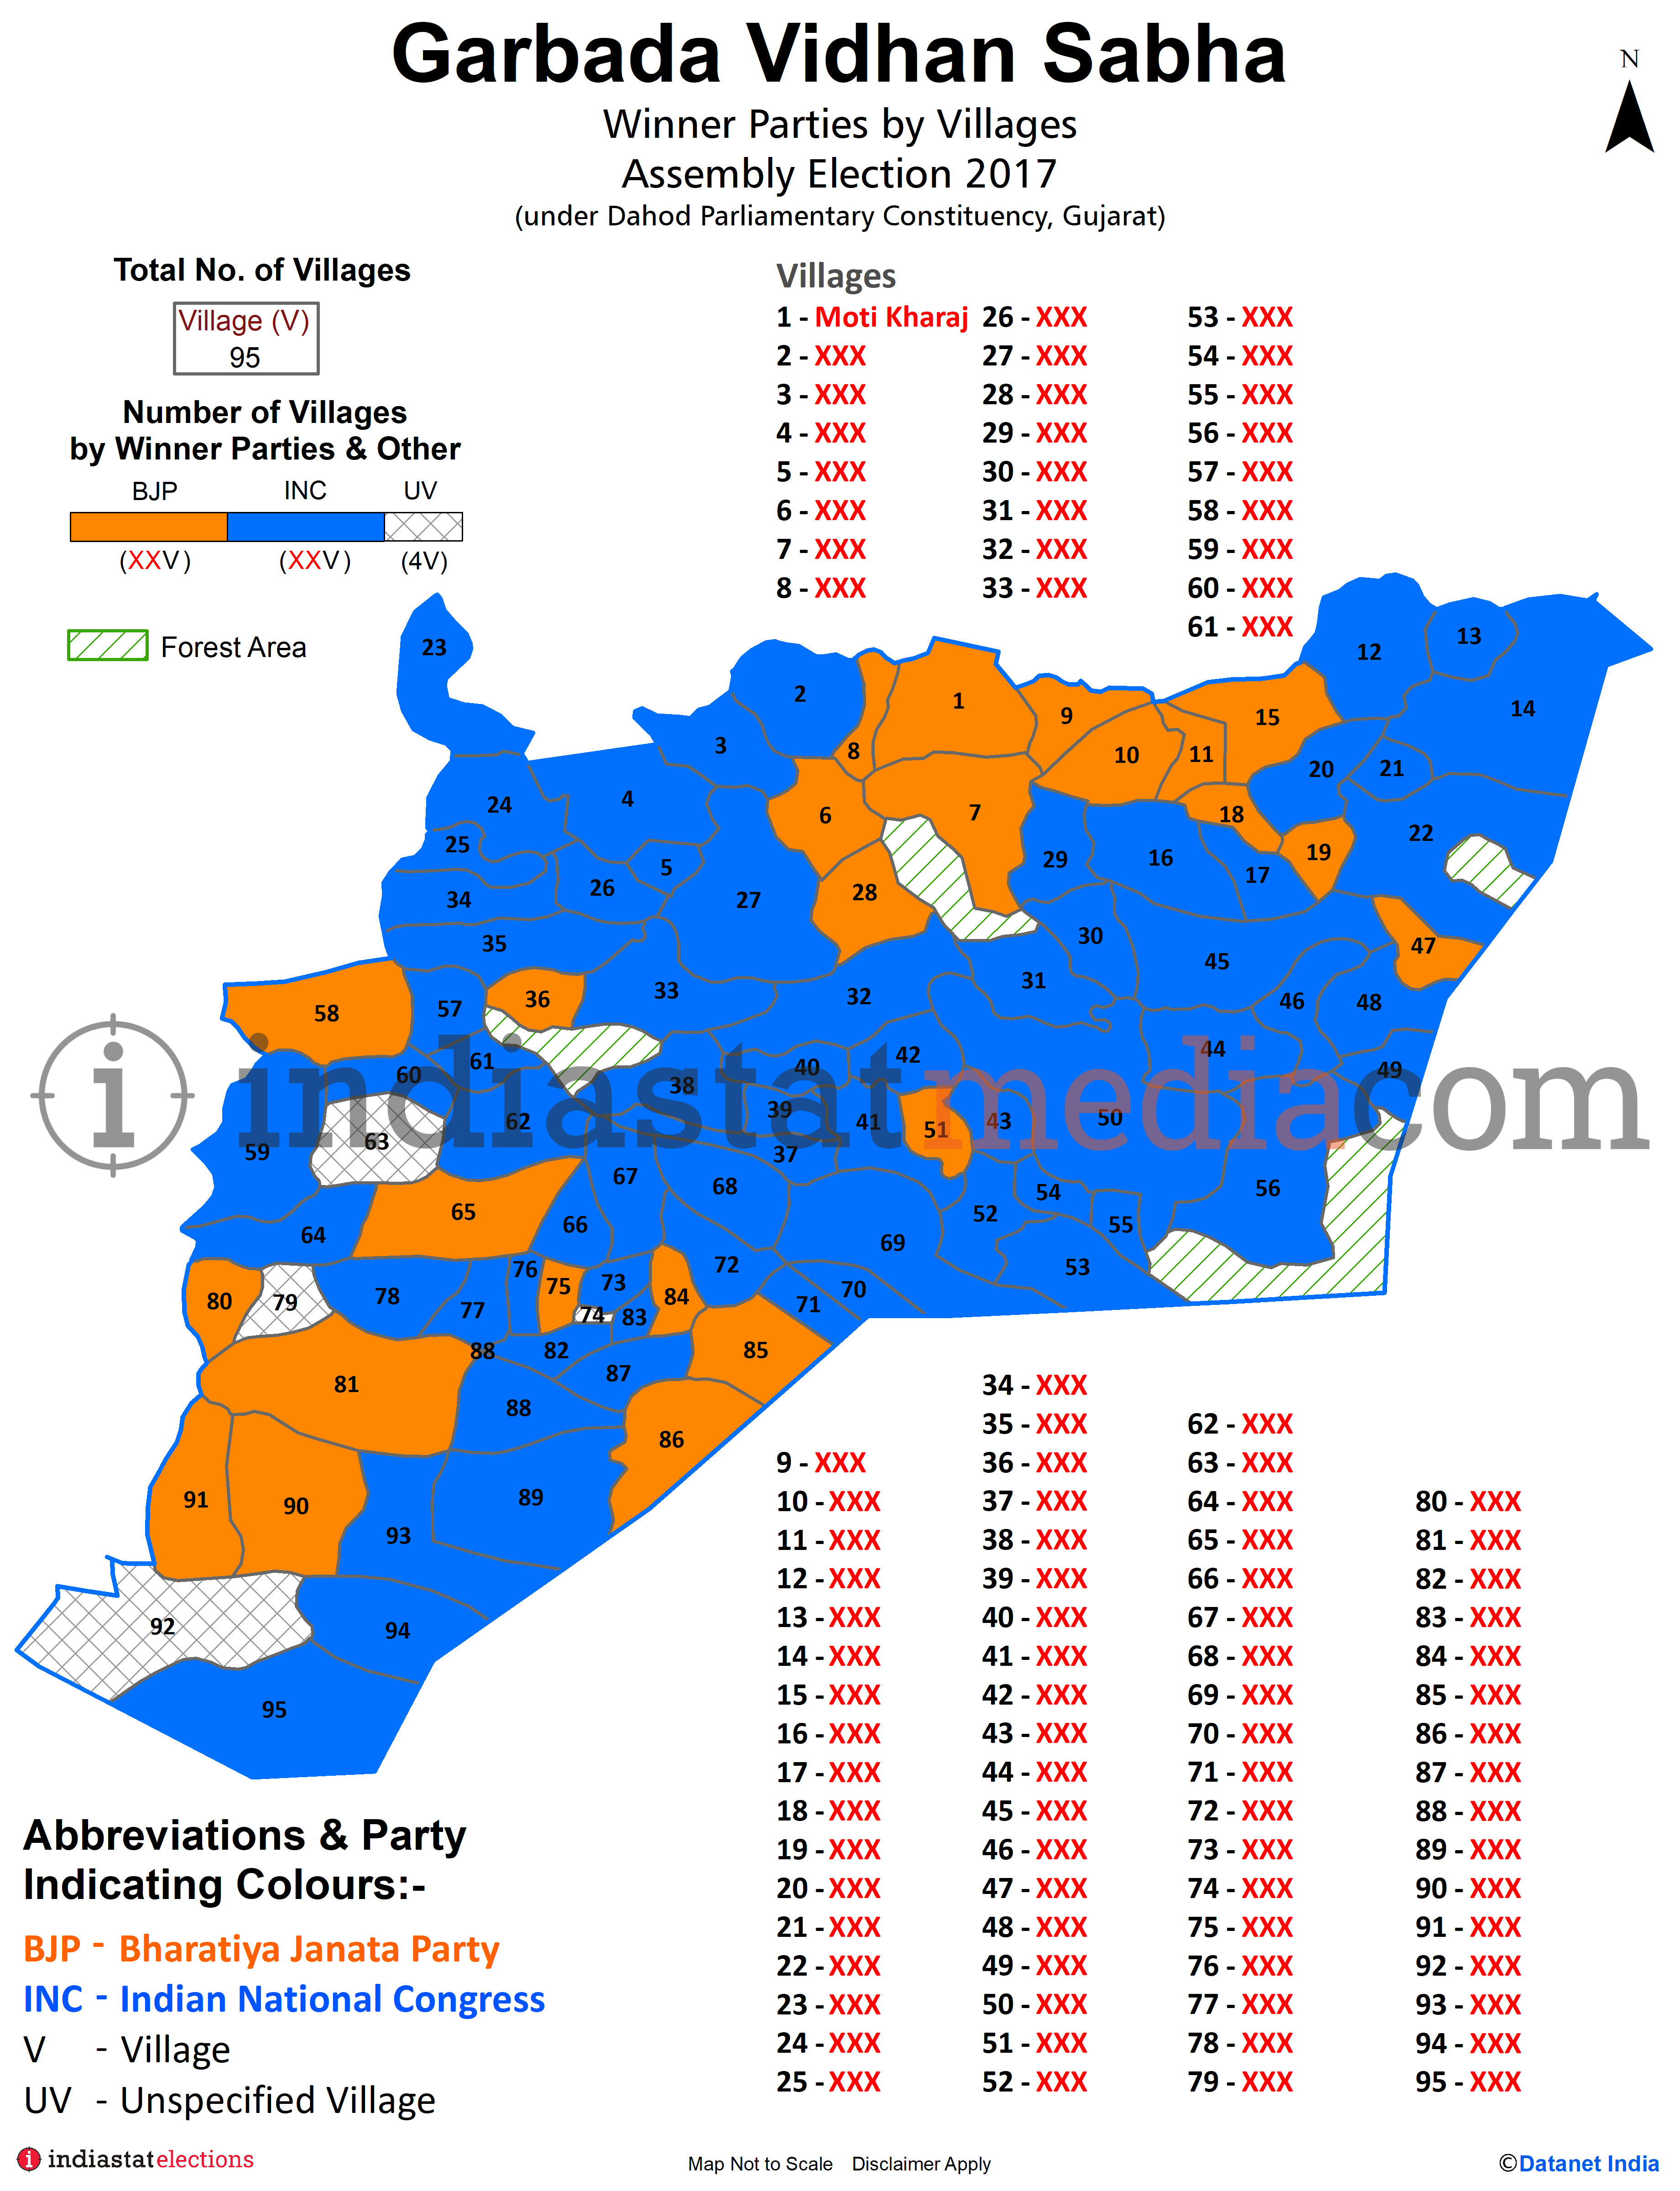 Winner Parties by Villages in Garbada Assembly Constituency under Dahod Parliamentary Constituency in Gujarat (Assembly Election - 2017)